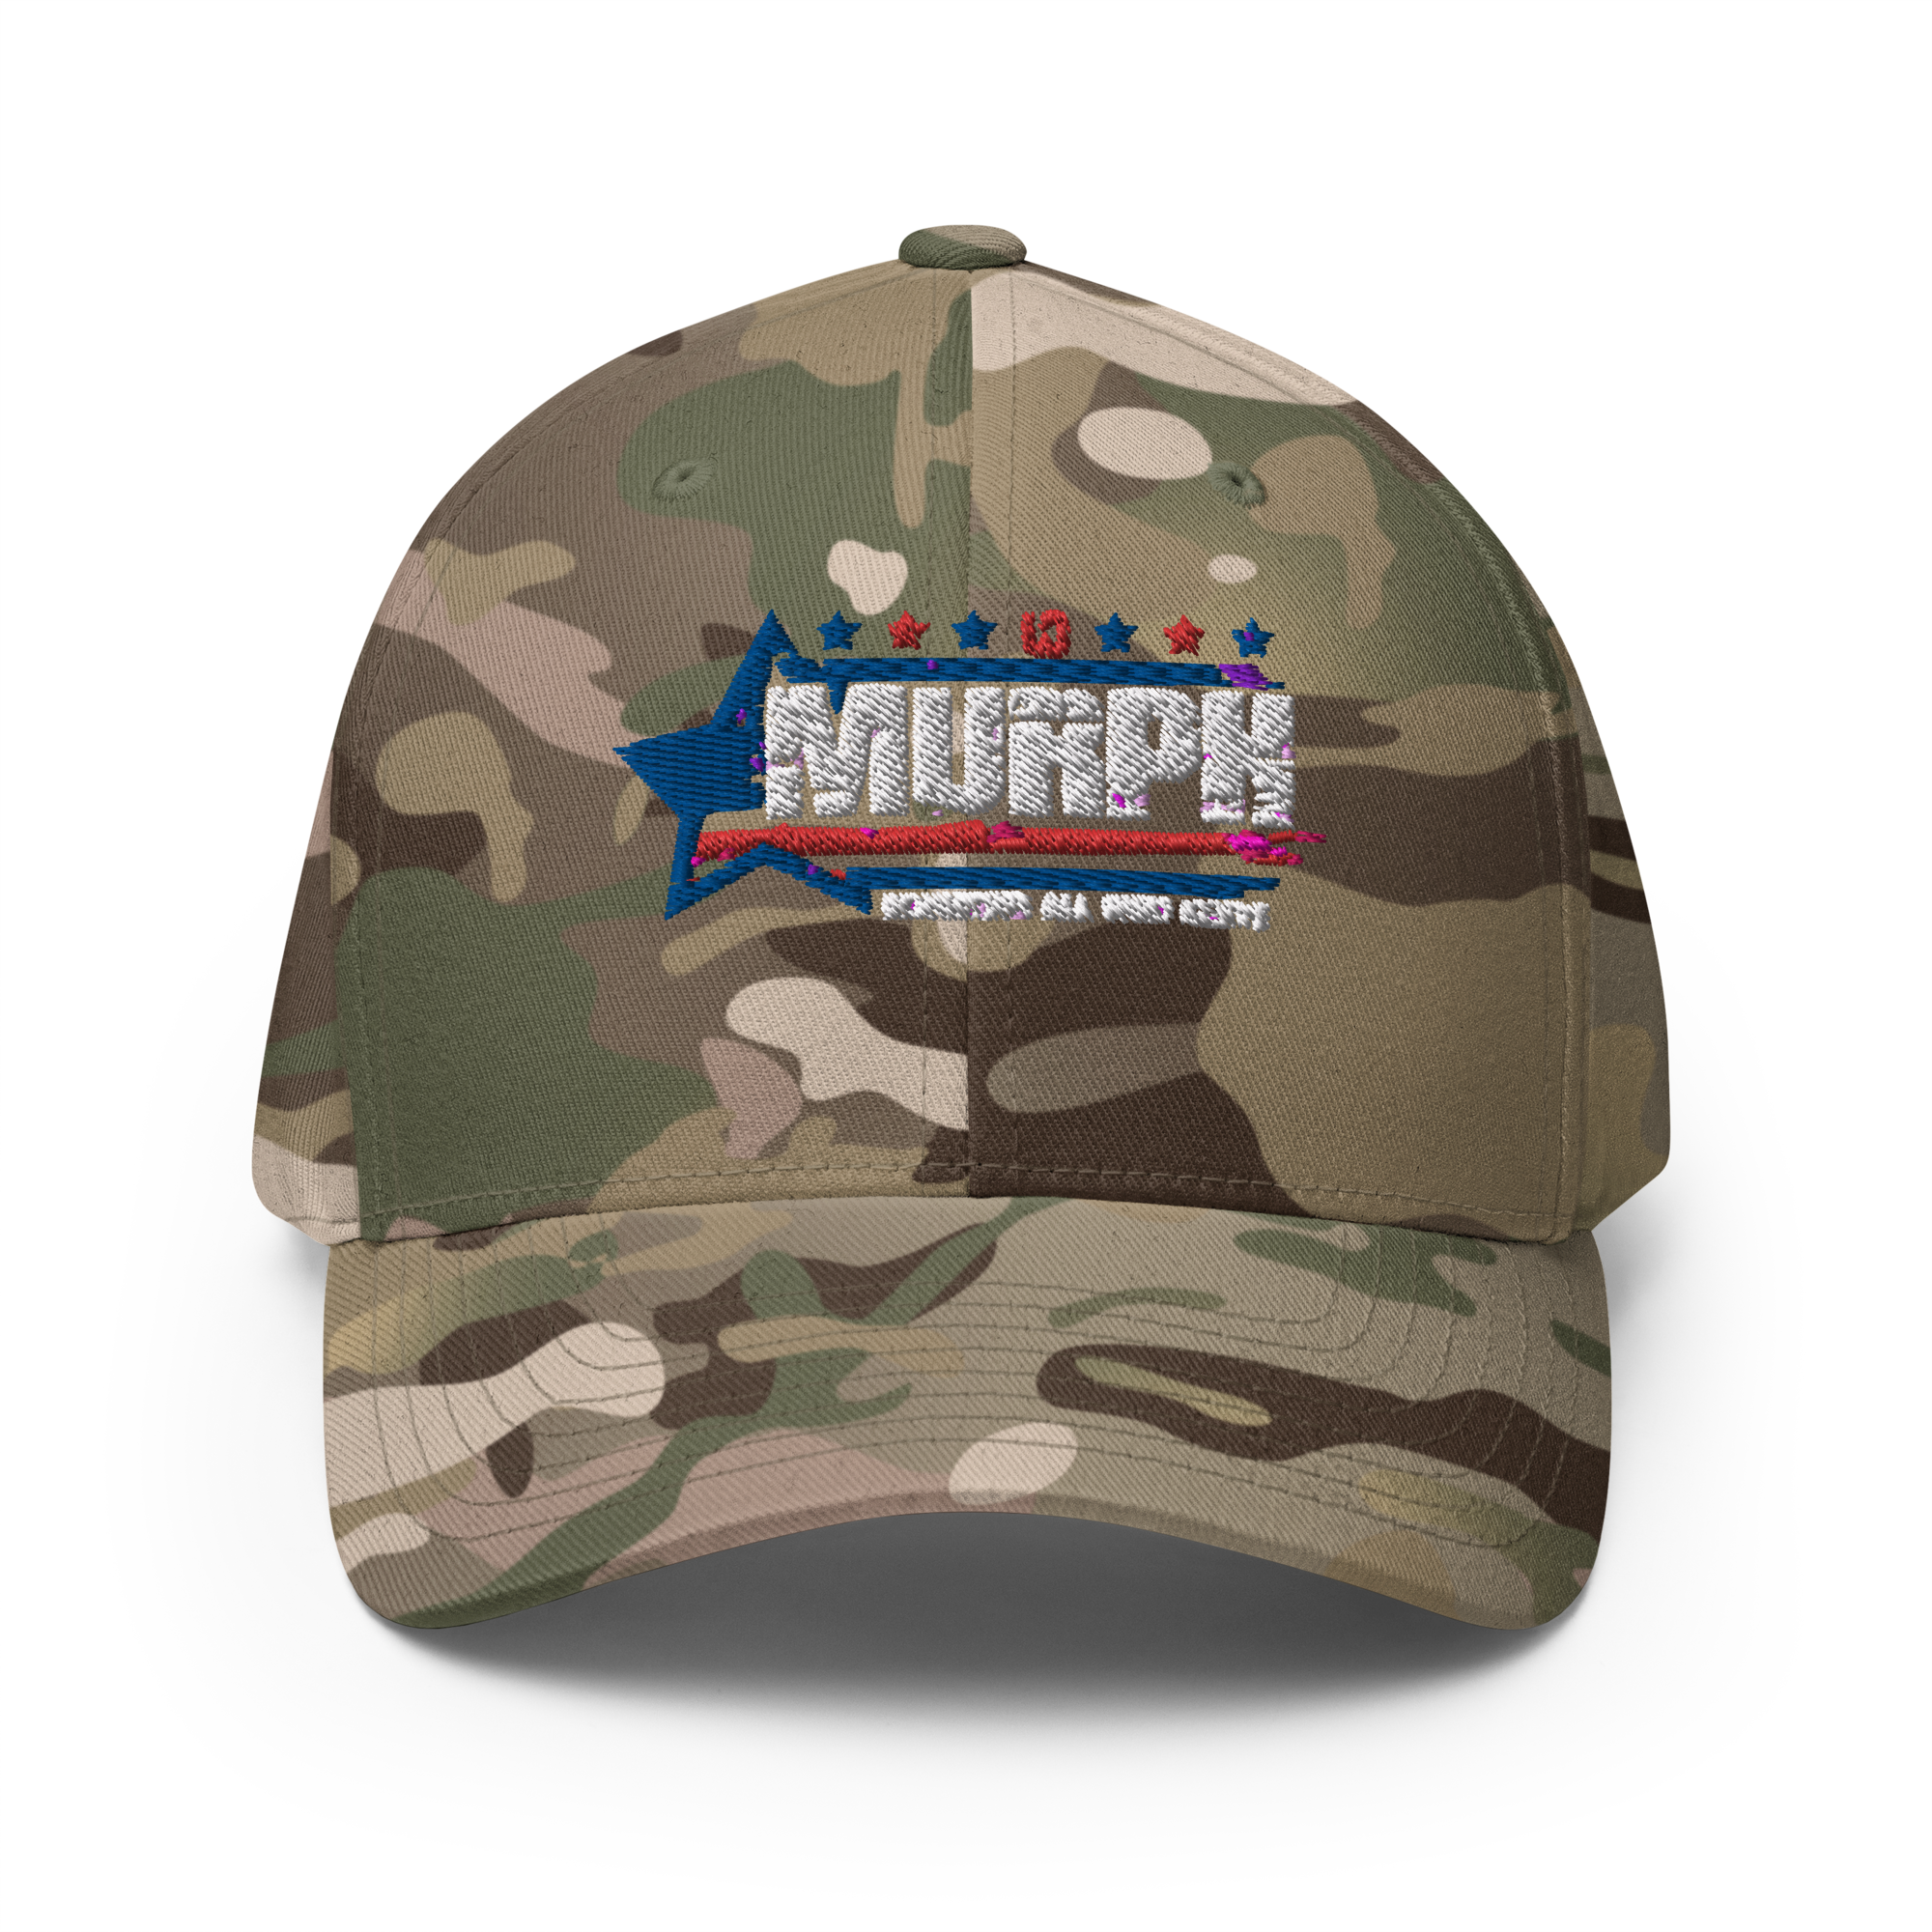 2022 WOD Obsessed Memorial Day Murph Challenge Structured Twill Cap